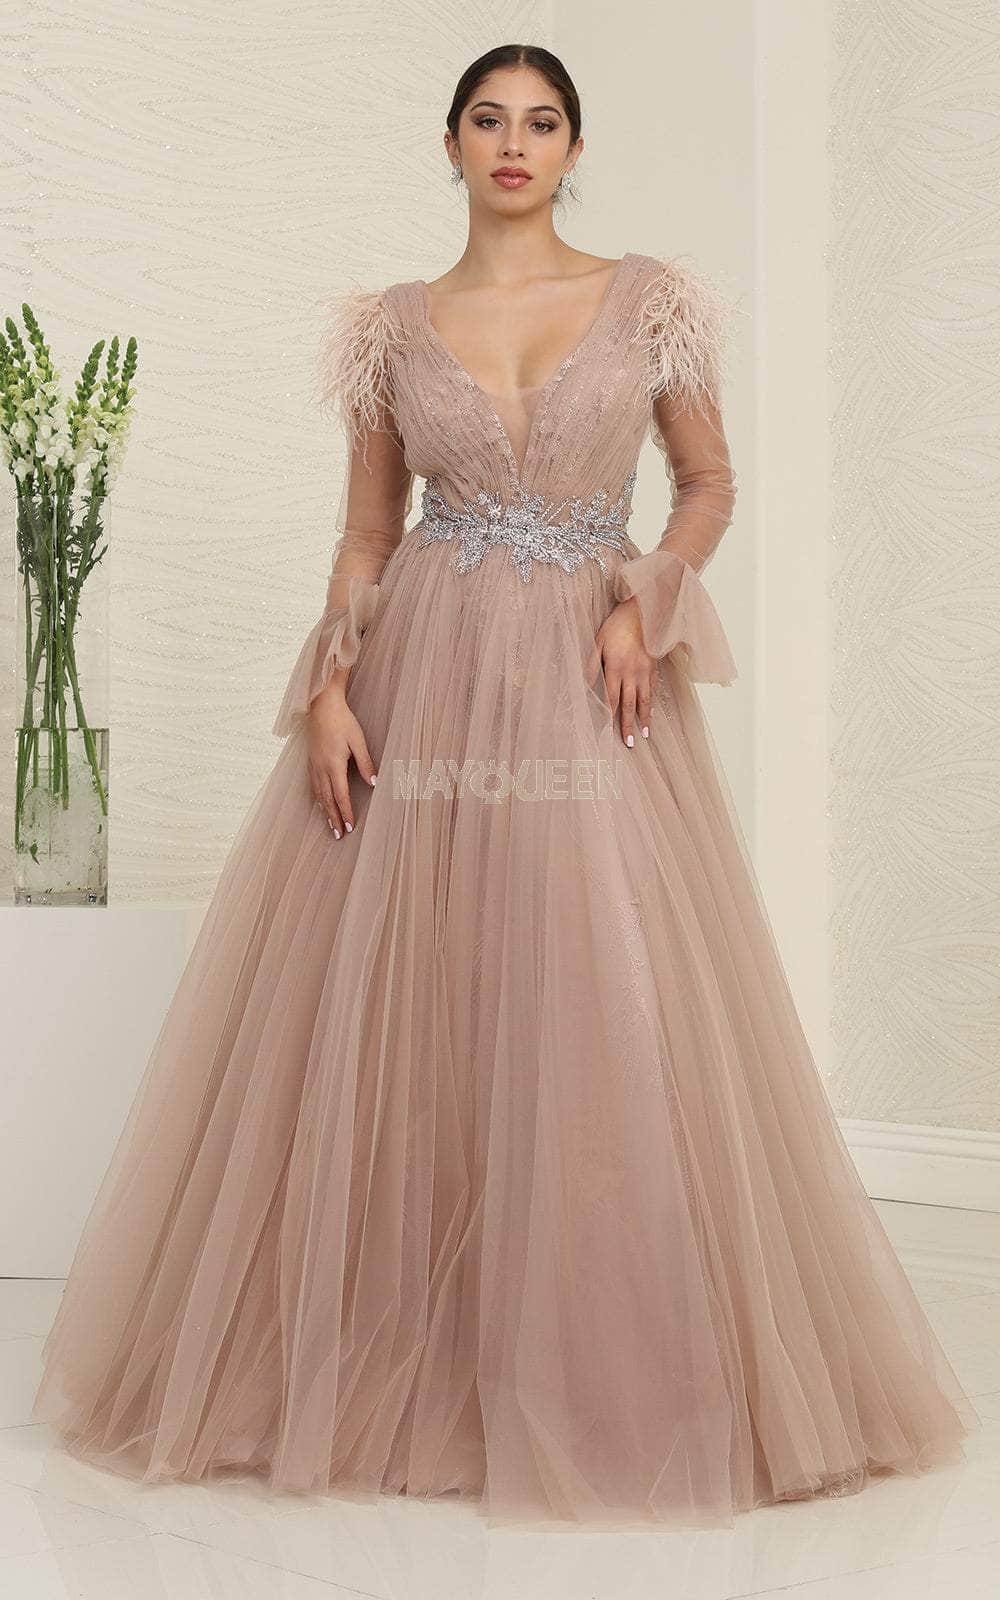 May Queen RQ8096 - Feathered Tulle Evening Dress
